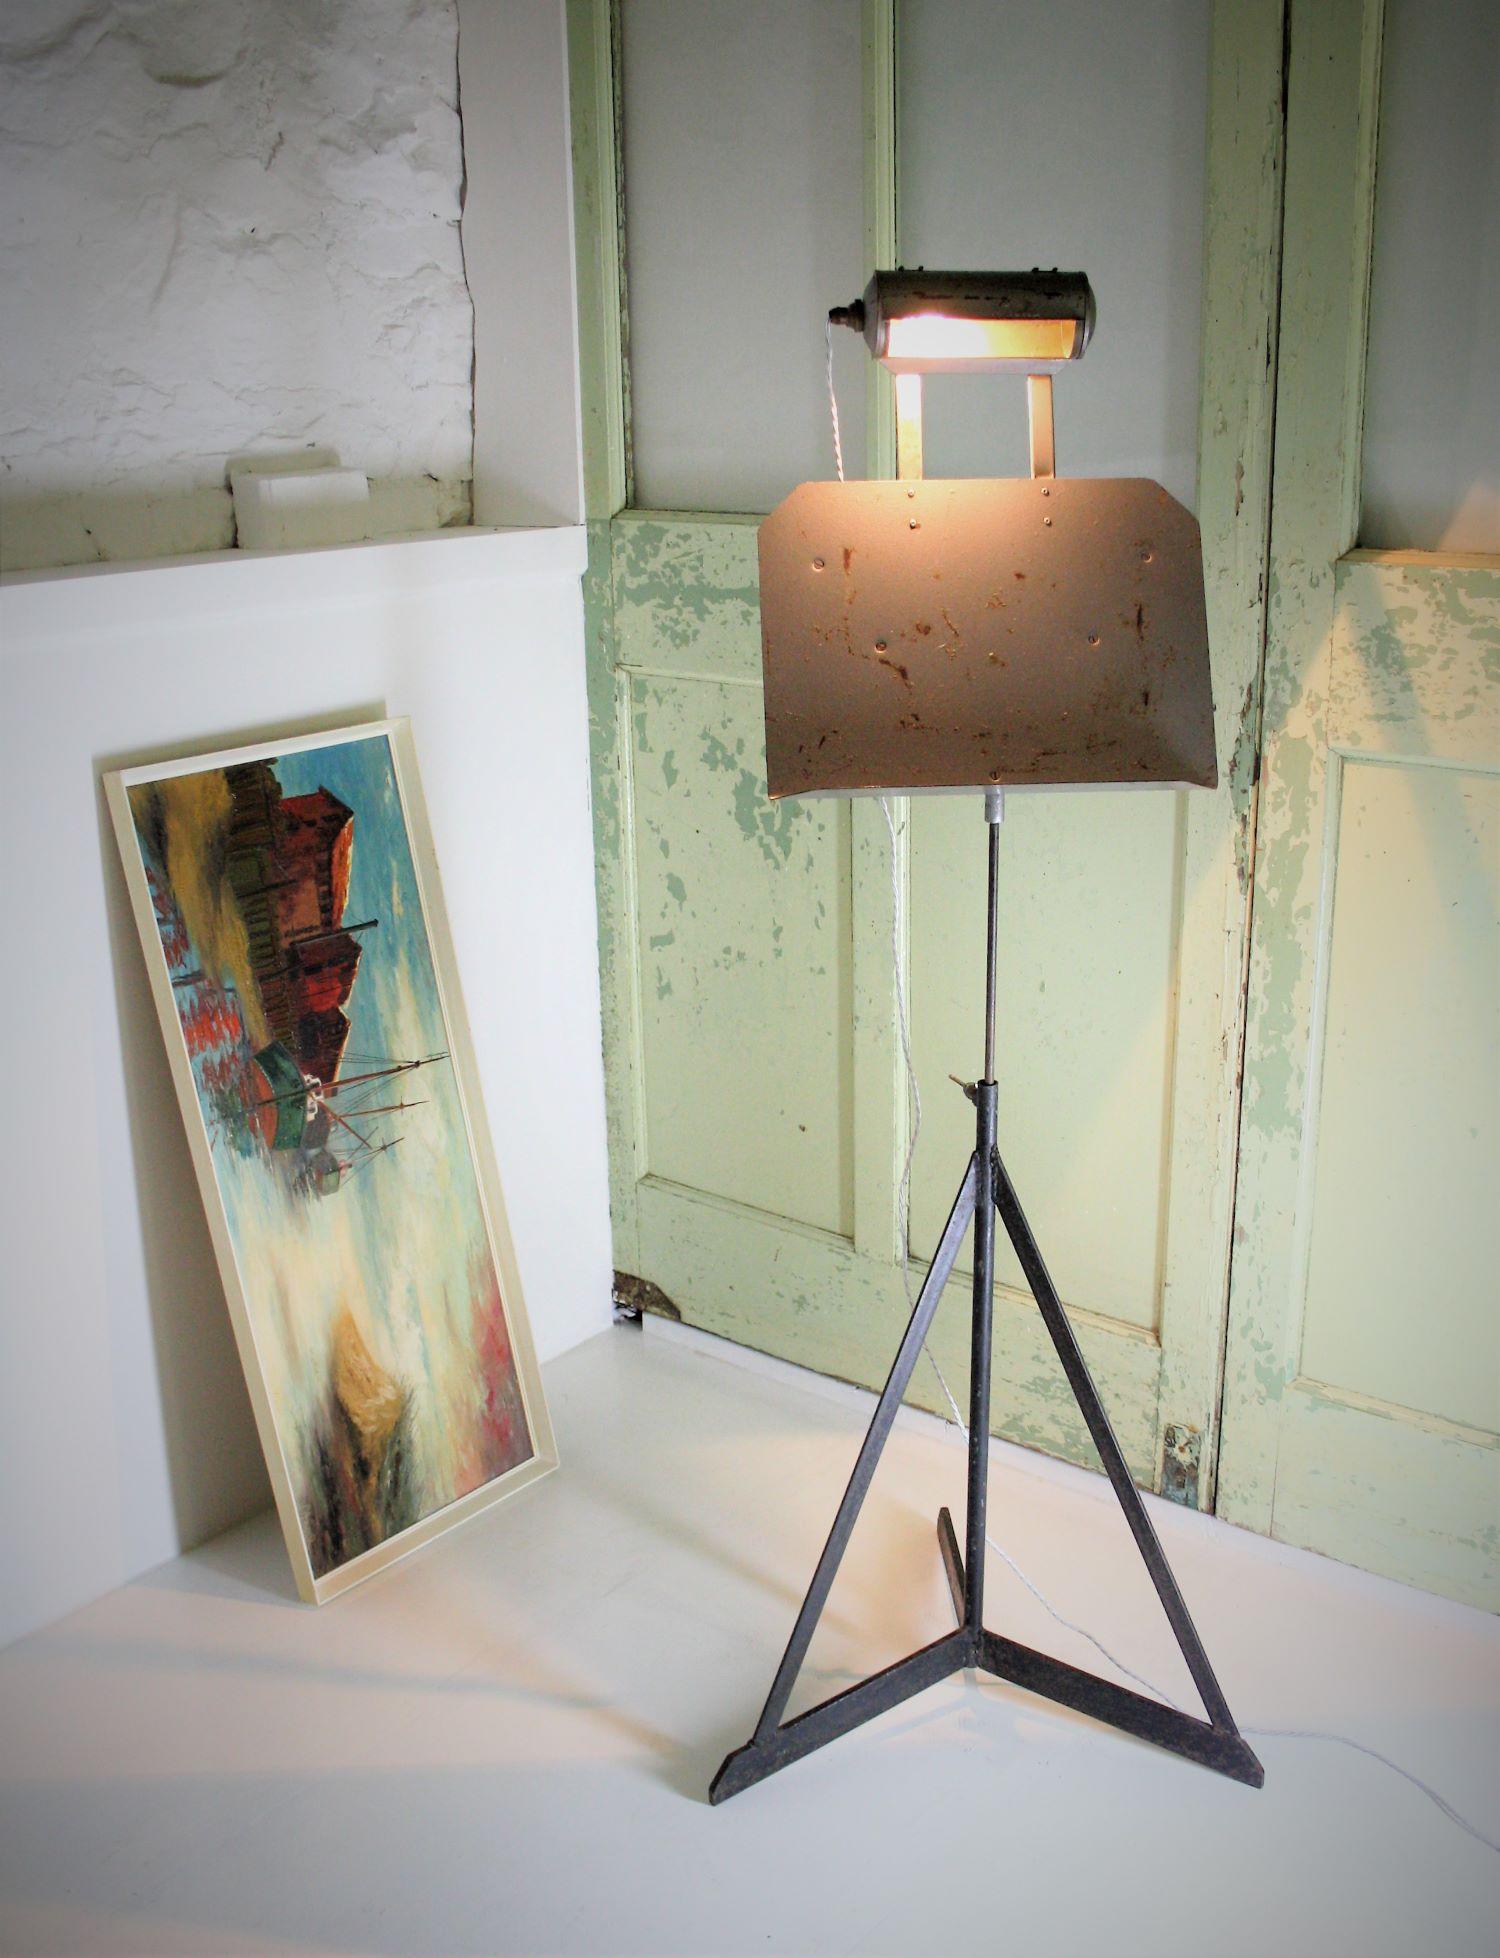 A heavy steel conductor music stand with light. Believed to be from a coal mine where conductors stands were used for choir practice. A nice decorative piece with good industrial form. an be used as a painting or book stand.
Circa 1950s
Stand is